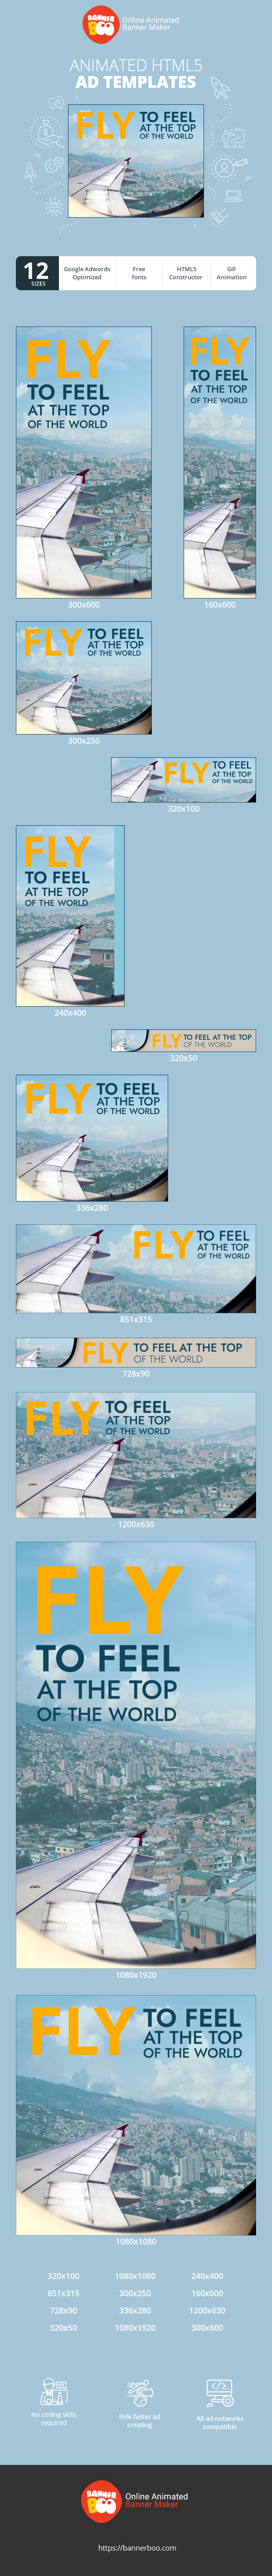 Banner ad template — Fly To Feel At The Top Of The World — Special Offer 70% Discount On A Second Ticket